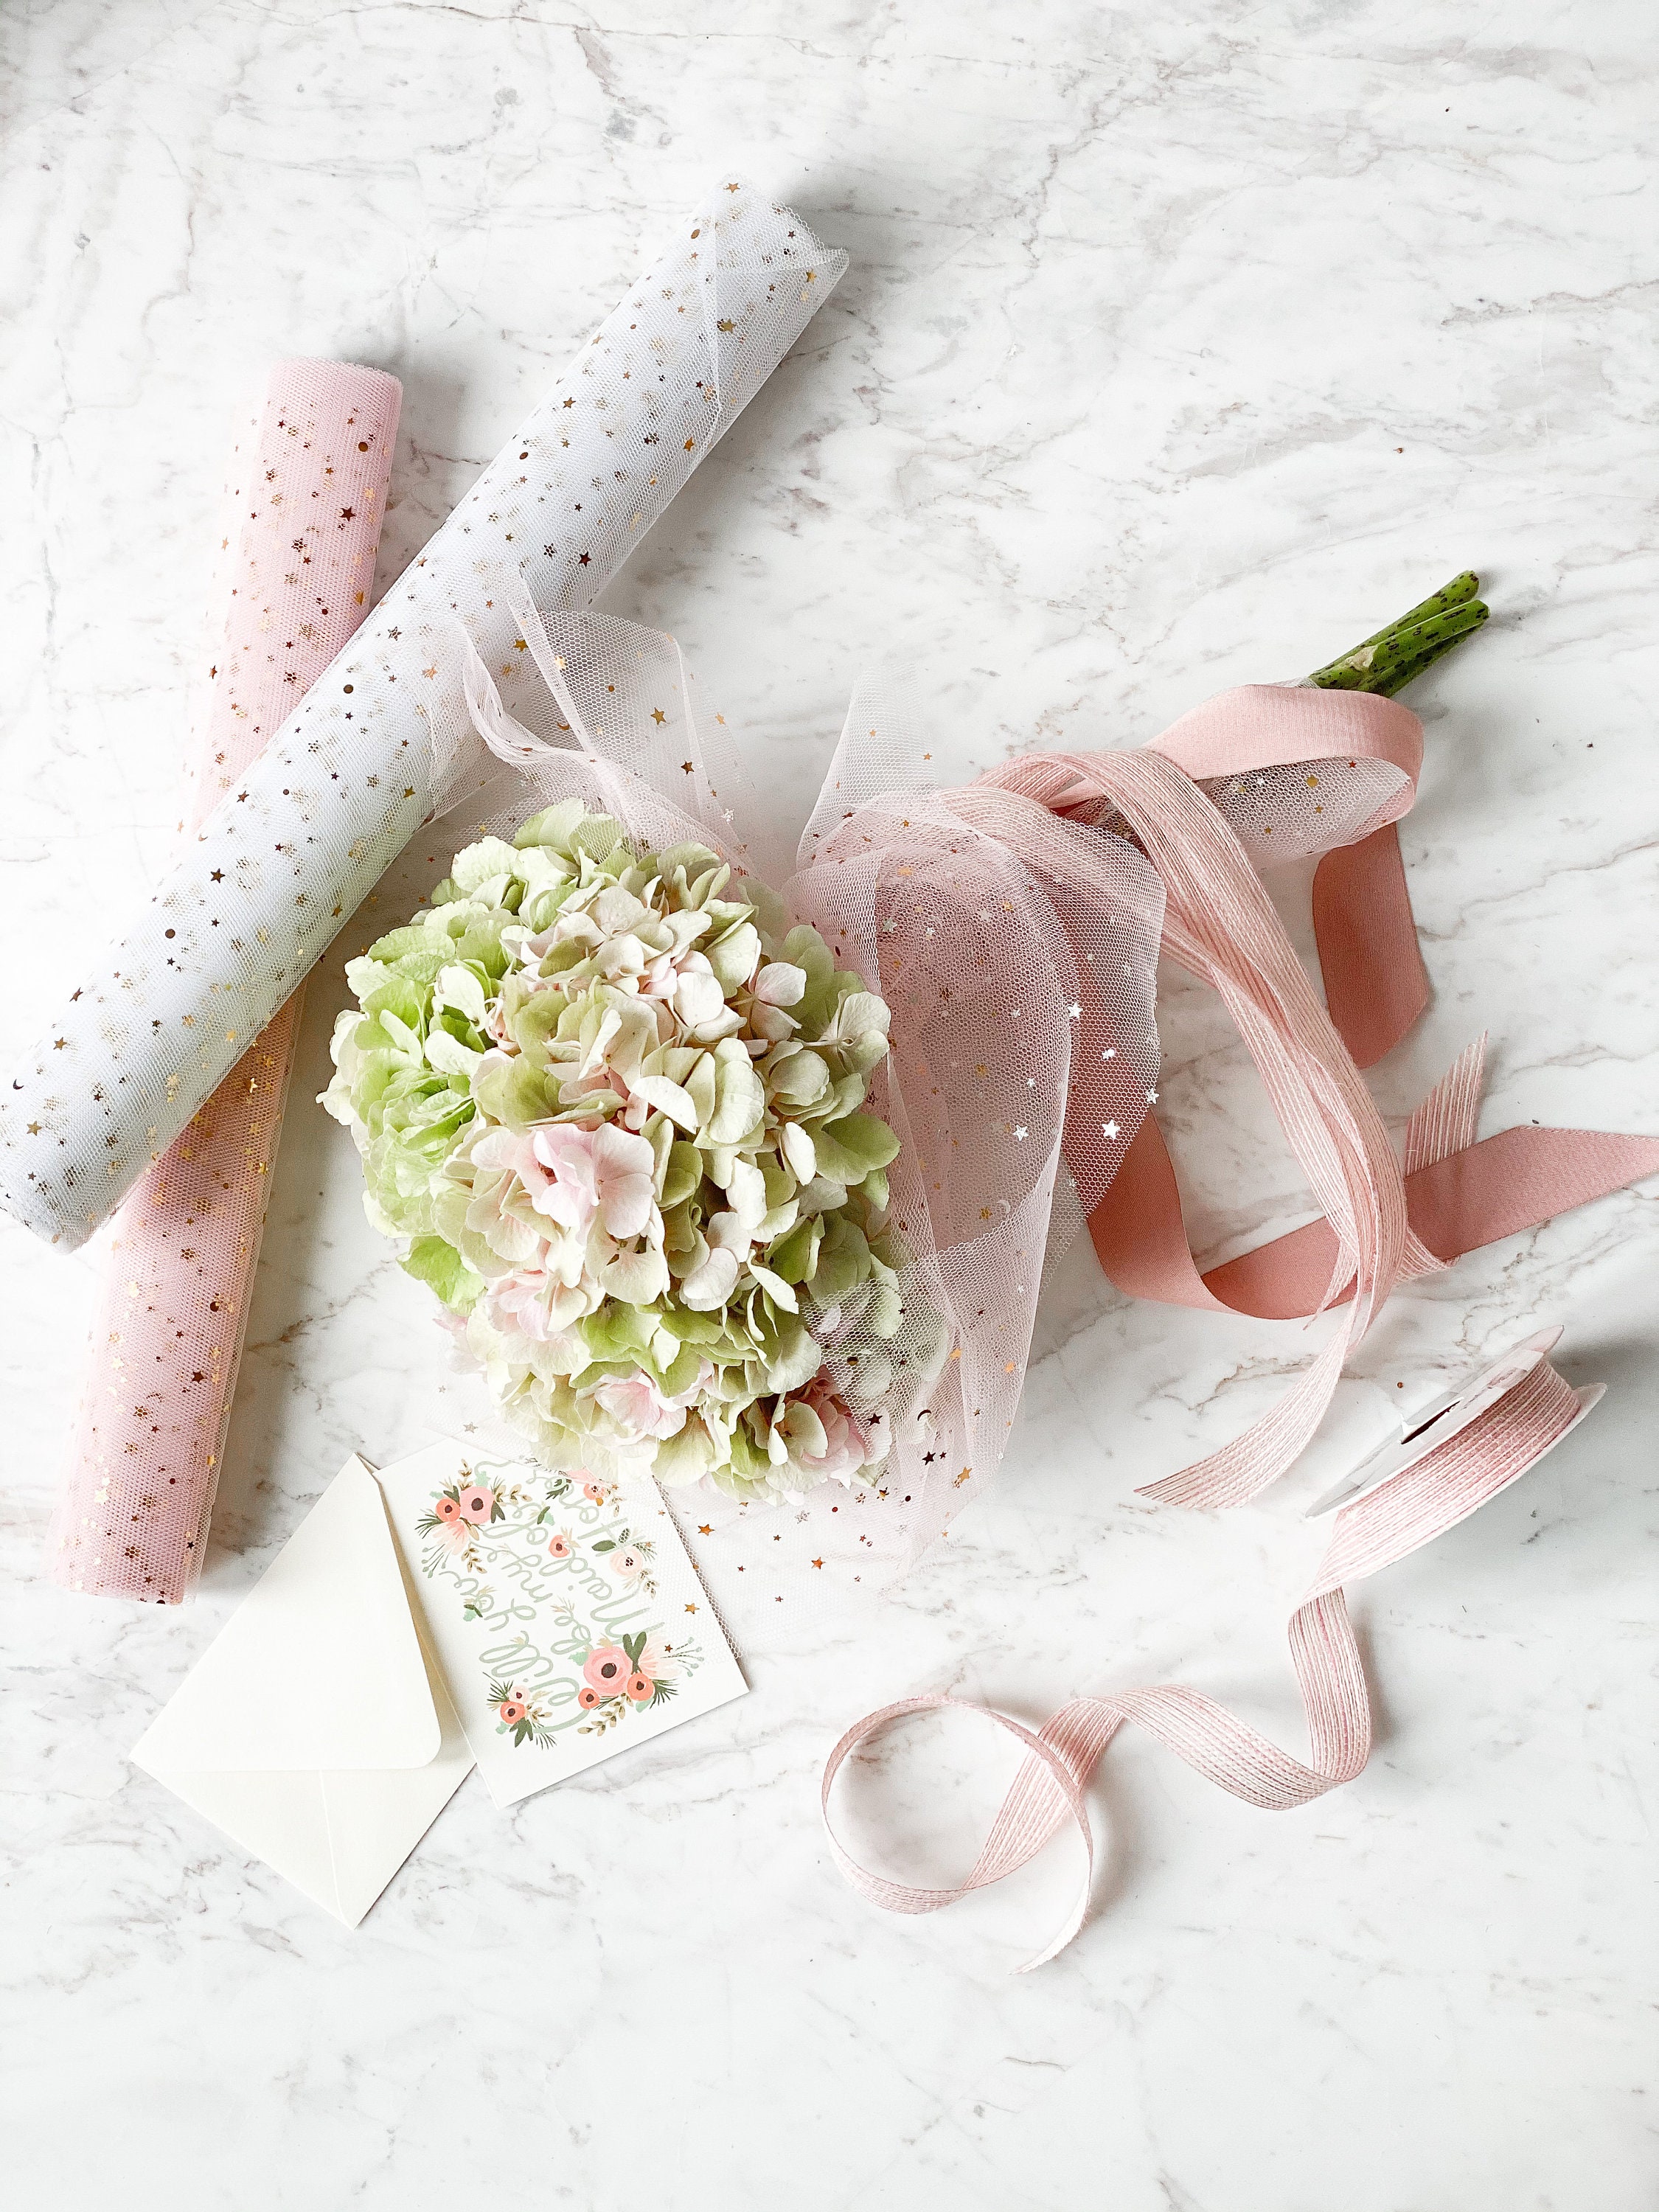 5 Yard Korean Flower Wrapping Paper Roll Bouquet Material Gauze